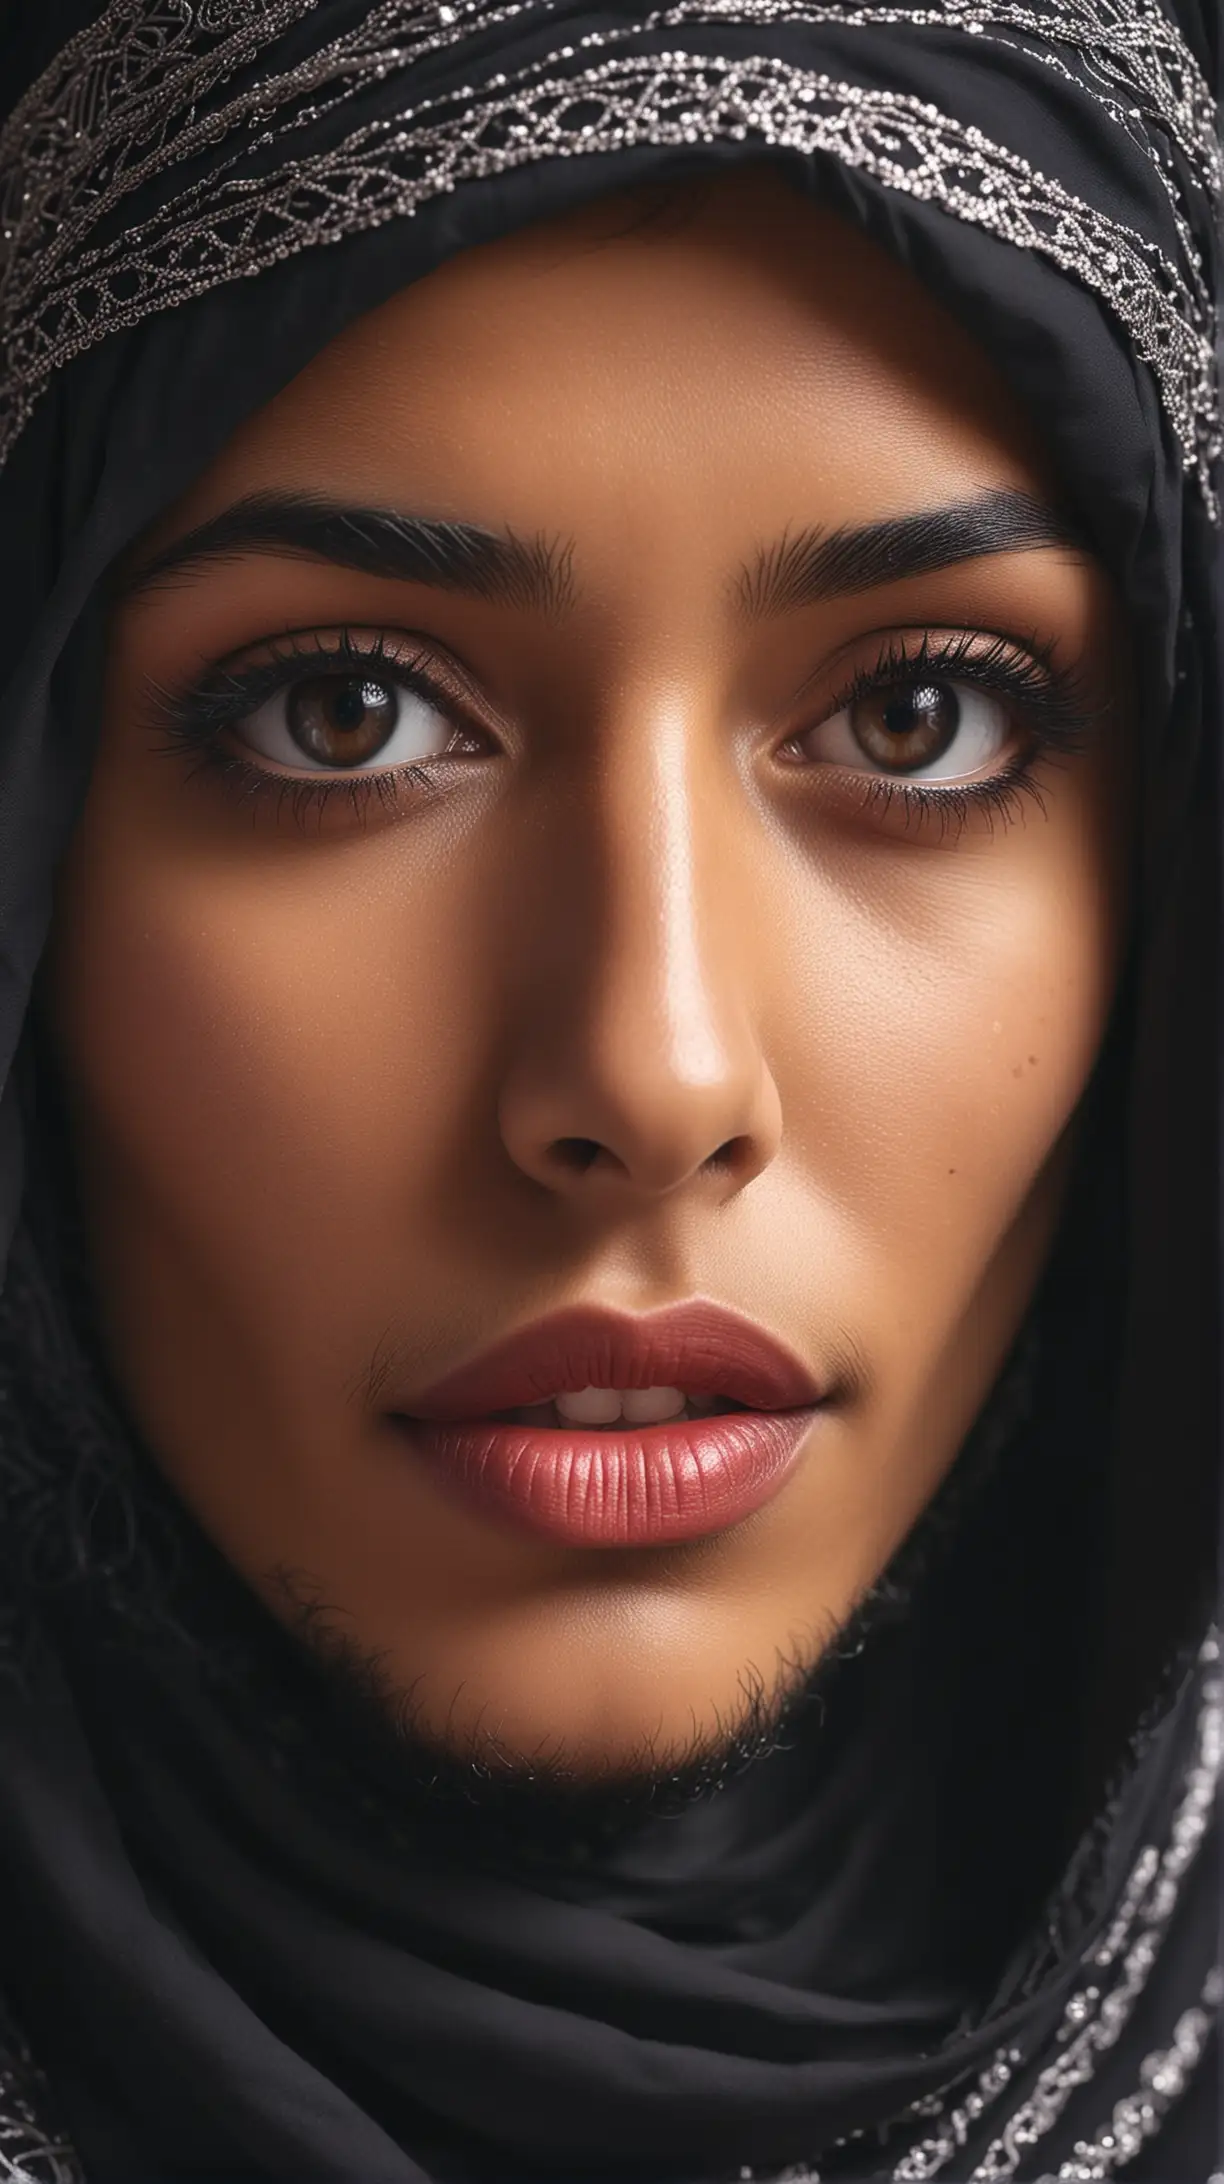 A bearded Tuareg from the Sahara desert in traditional clothing looks lovingly into the eyes of the charming and beautiful Instagram model Aitana Lopez, an ethnic Arab fashionista, an Arab woman in a high-contrast niqab, UHD 8k